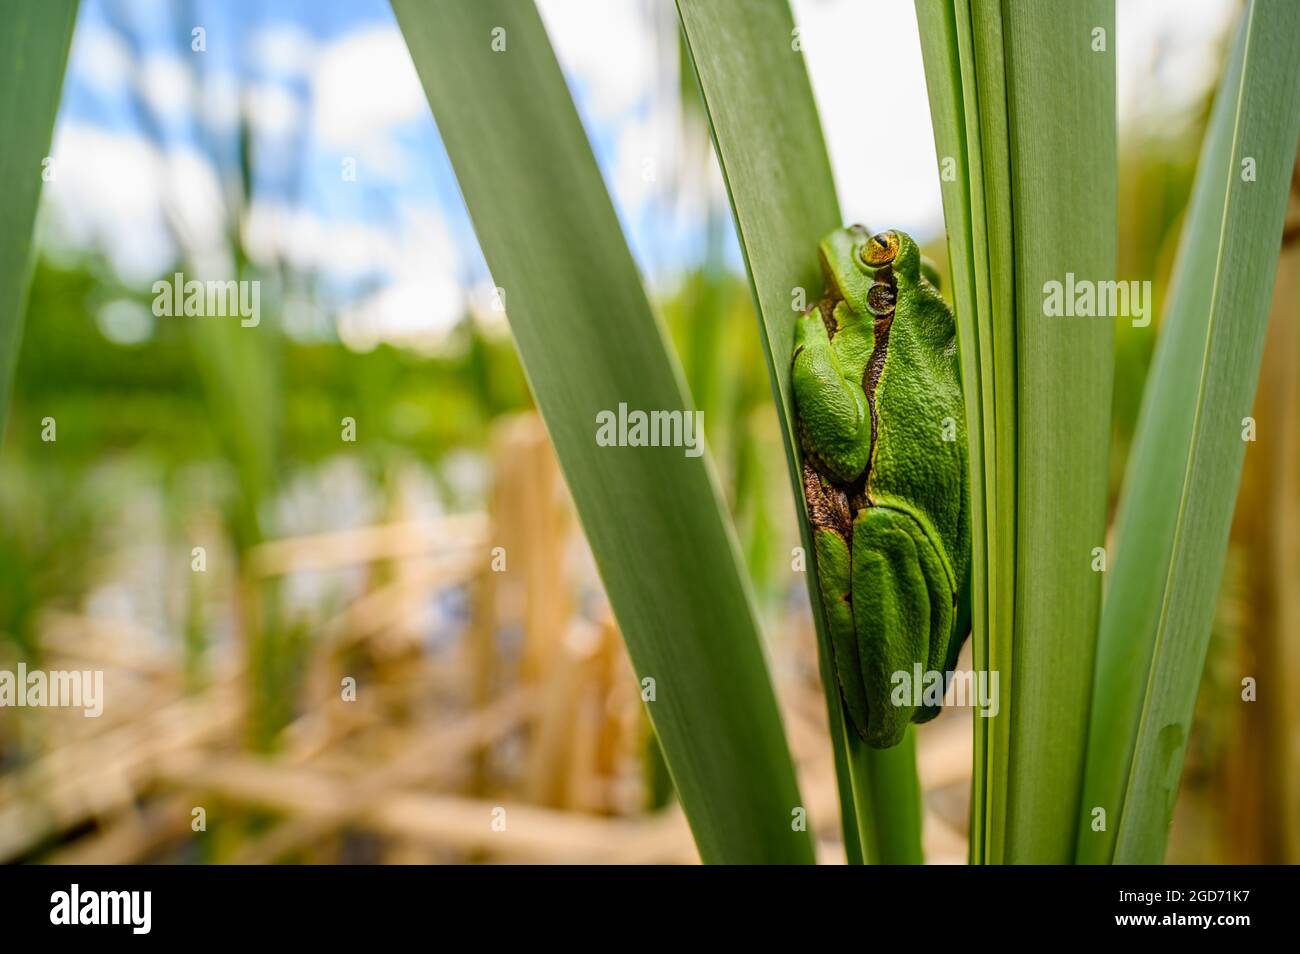 The European tree frog (Hyla arborea) sitting among the leaves of a green cattail. Beautiful little green frog, the sky can be seen in the background, Stock Photo